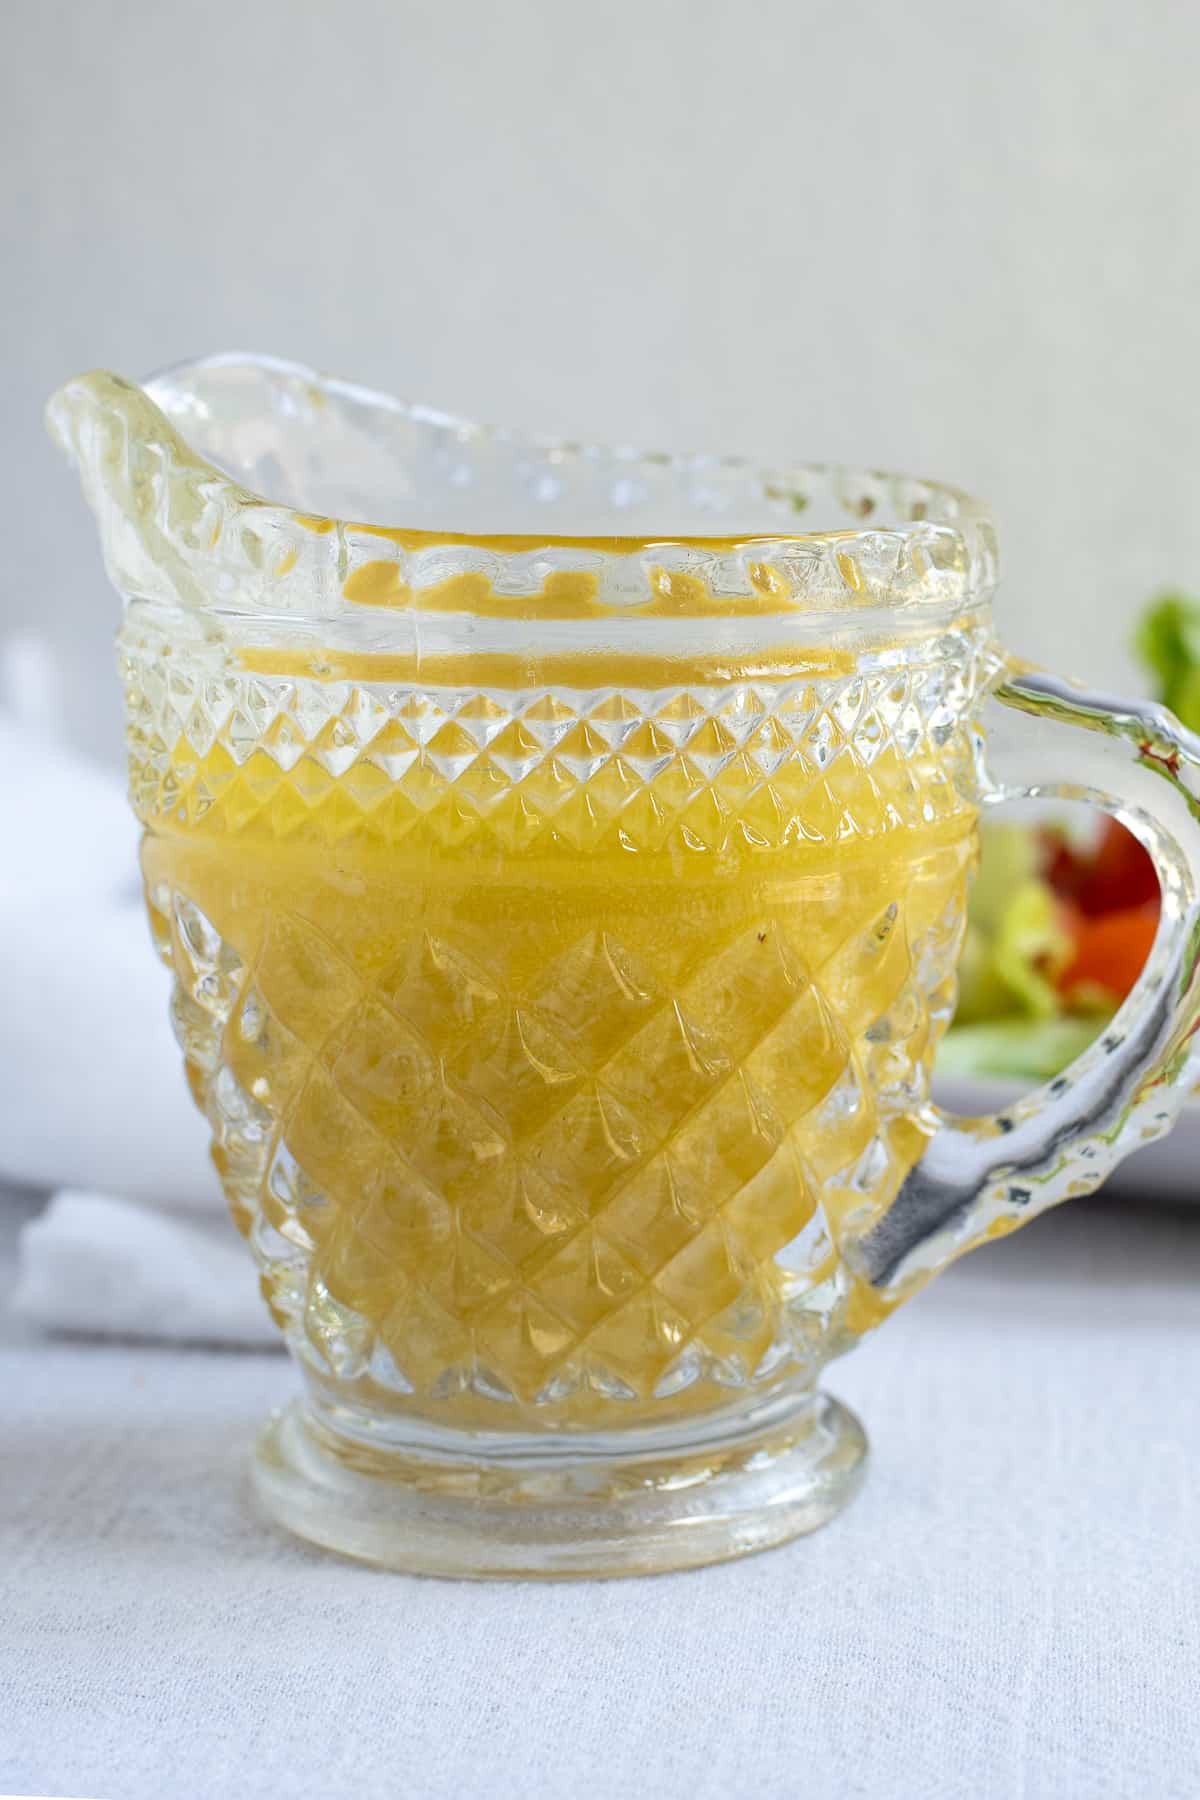 citrus salad dressing in glass pitcher on white background